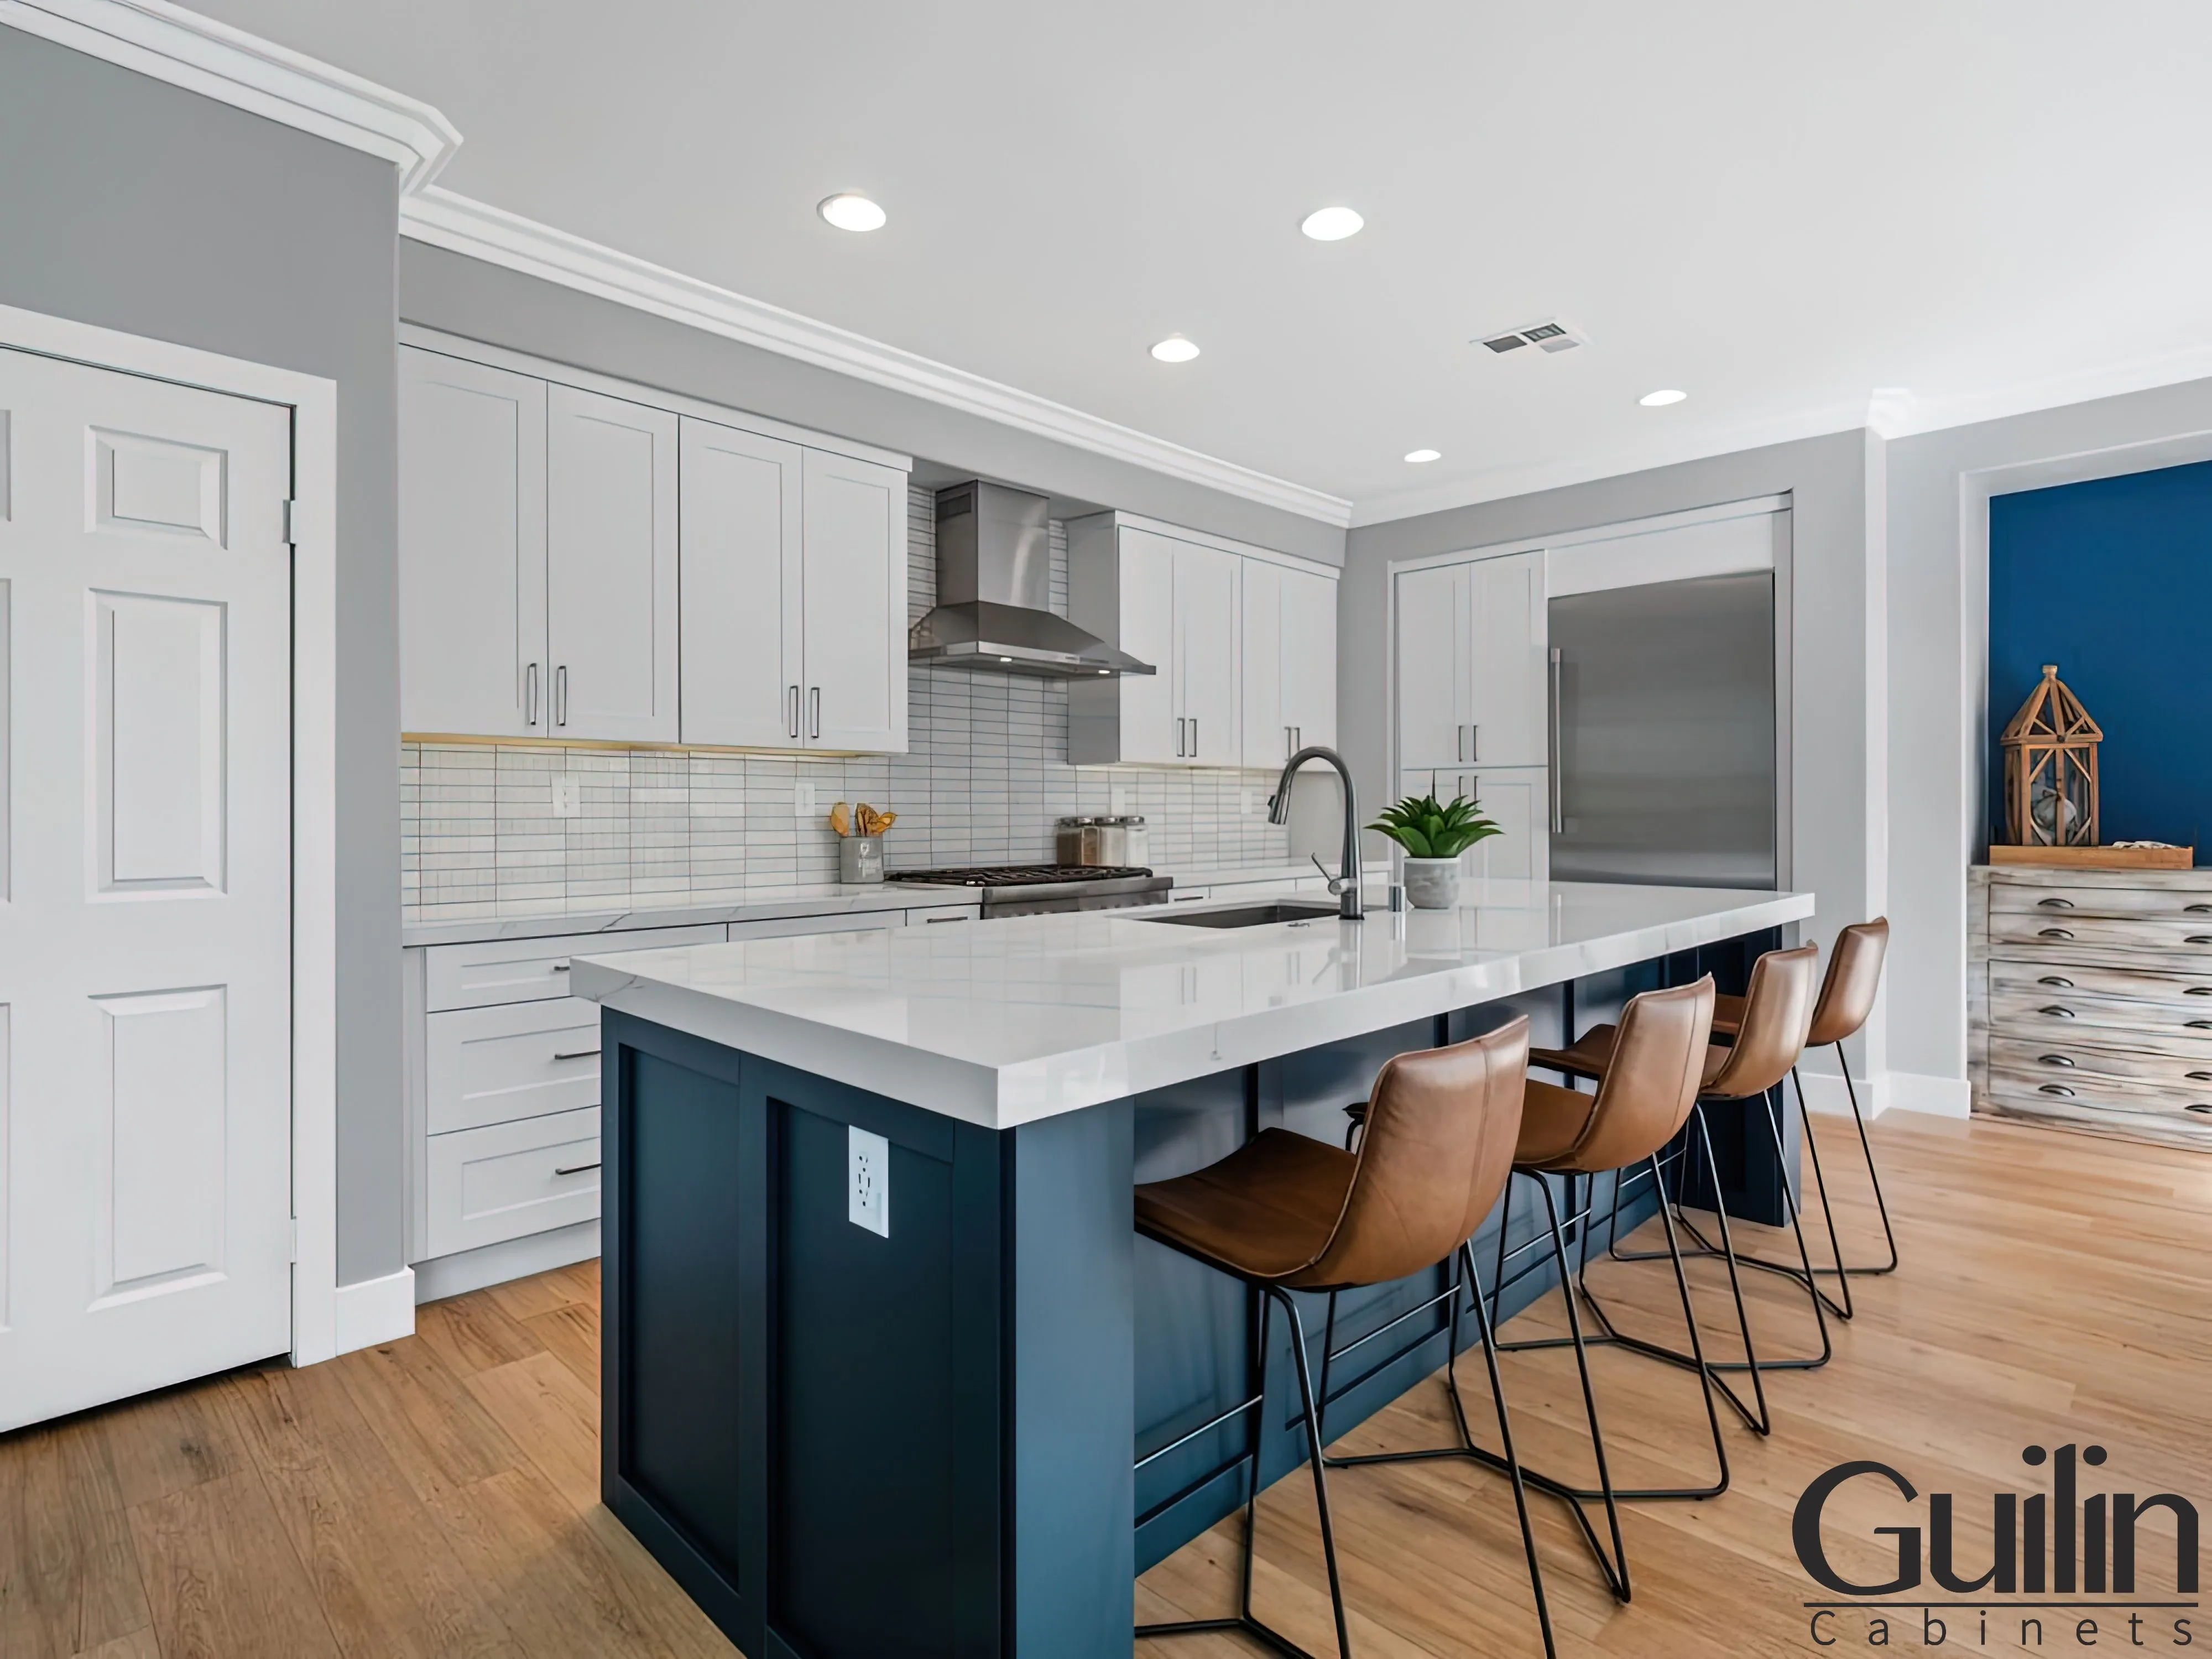 Adding navy blue cabinets to your kitchen design can give the area a feeling of depth and richness after taking into account a variety of color alternatives.